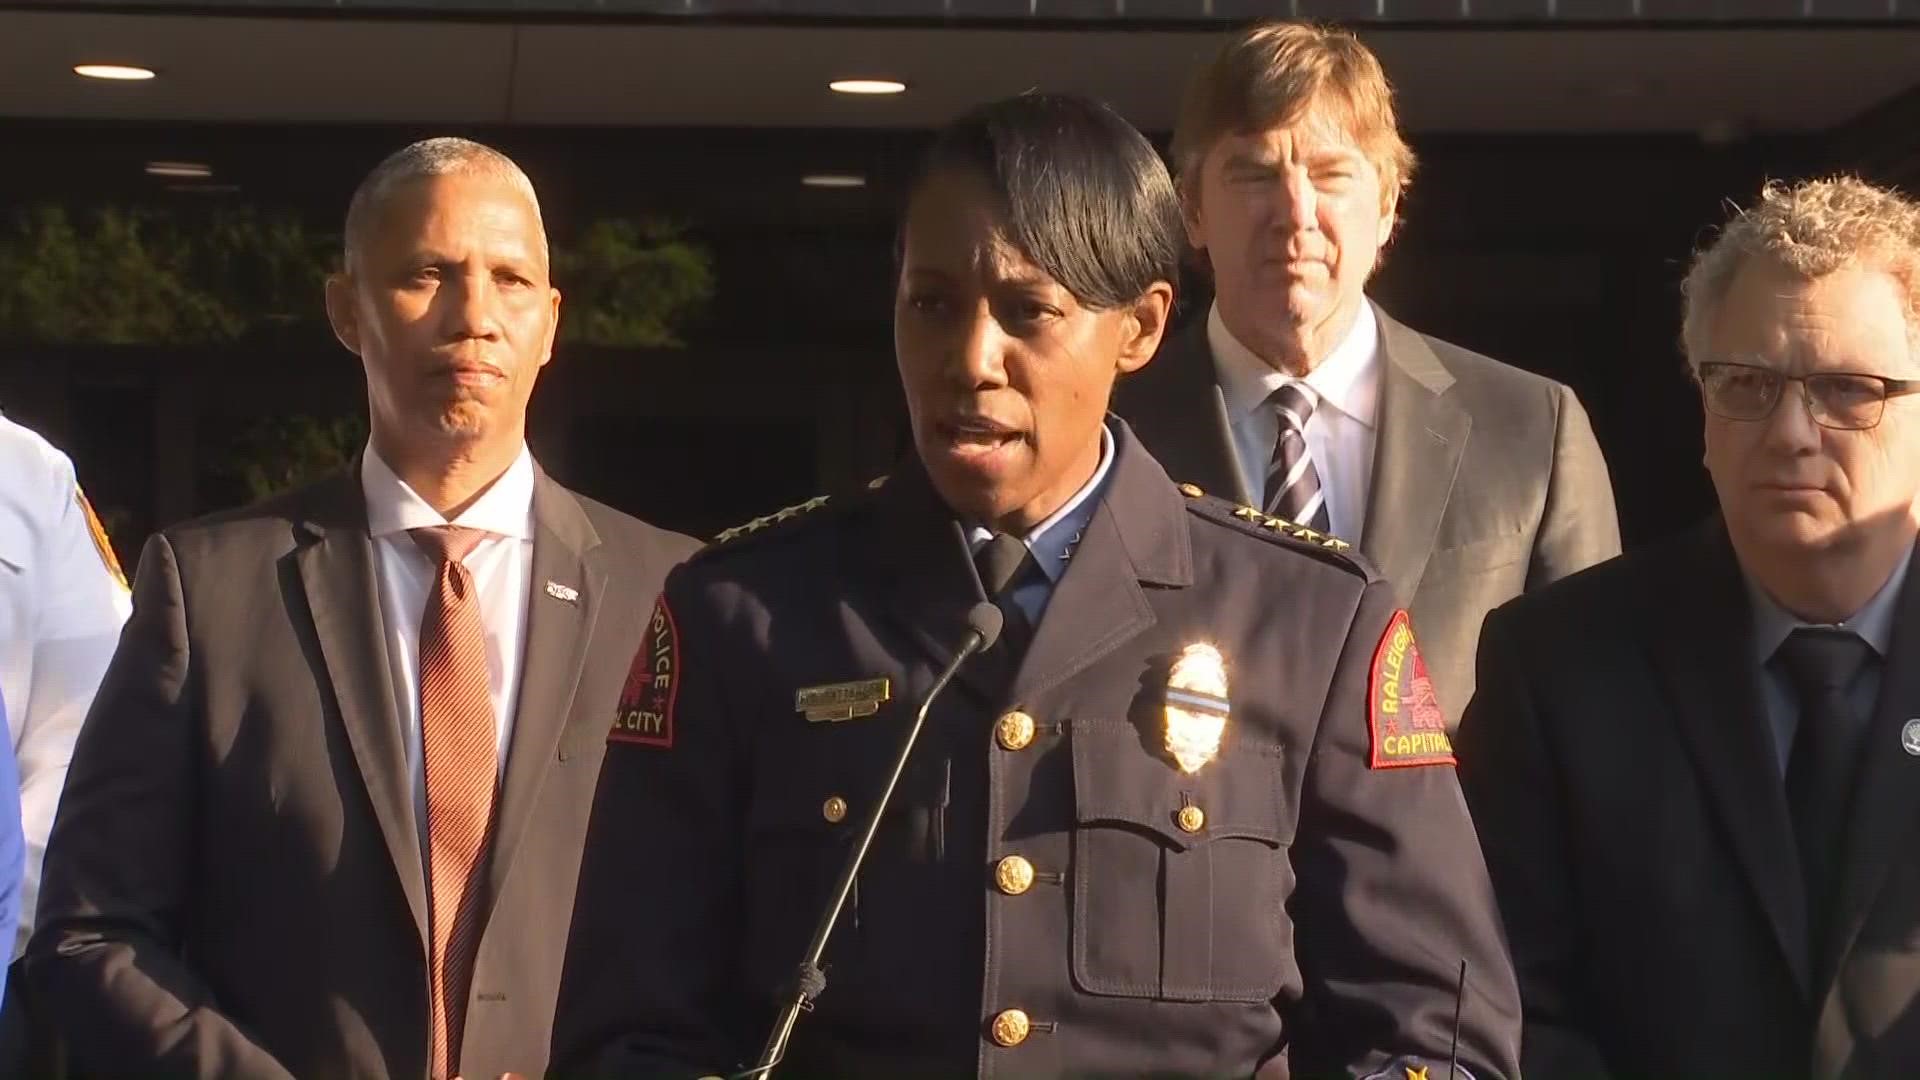 Raleigh Police Chief Estella Patterson said the officer was on his way to work at the time he was killed.